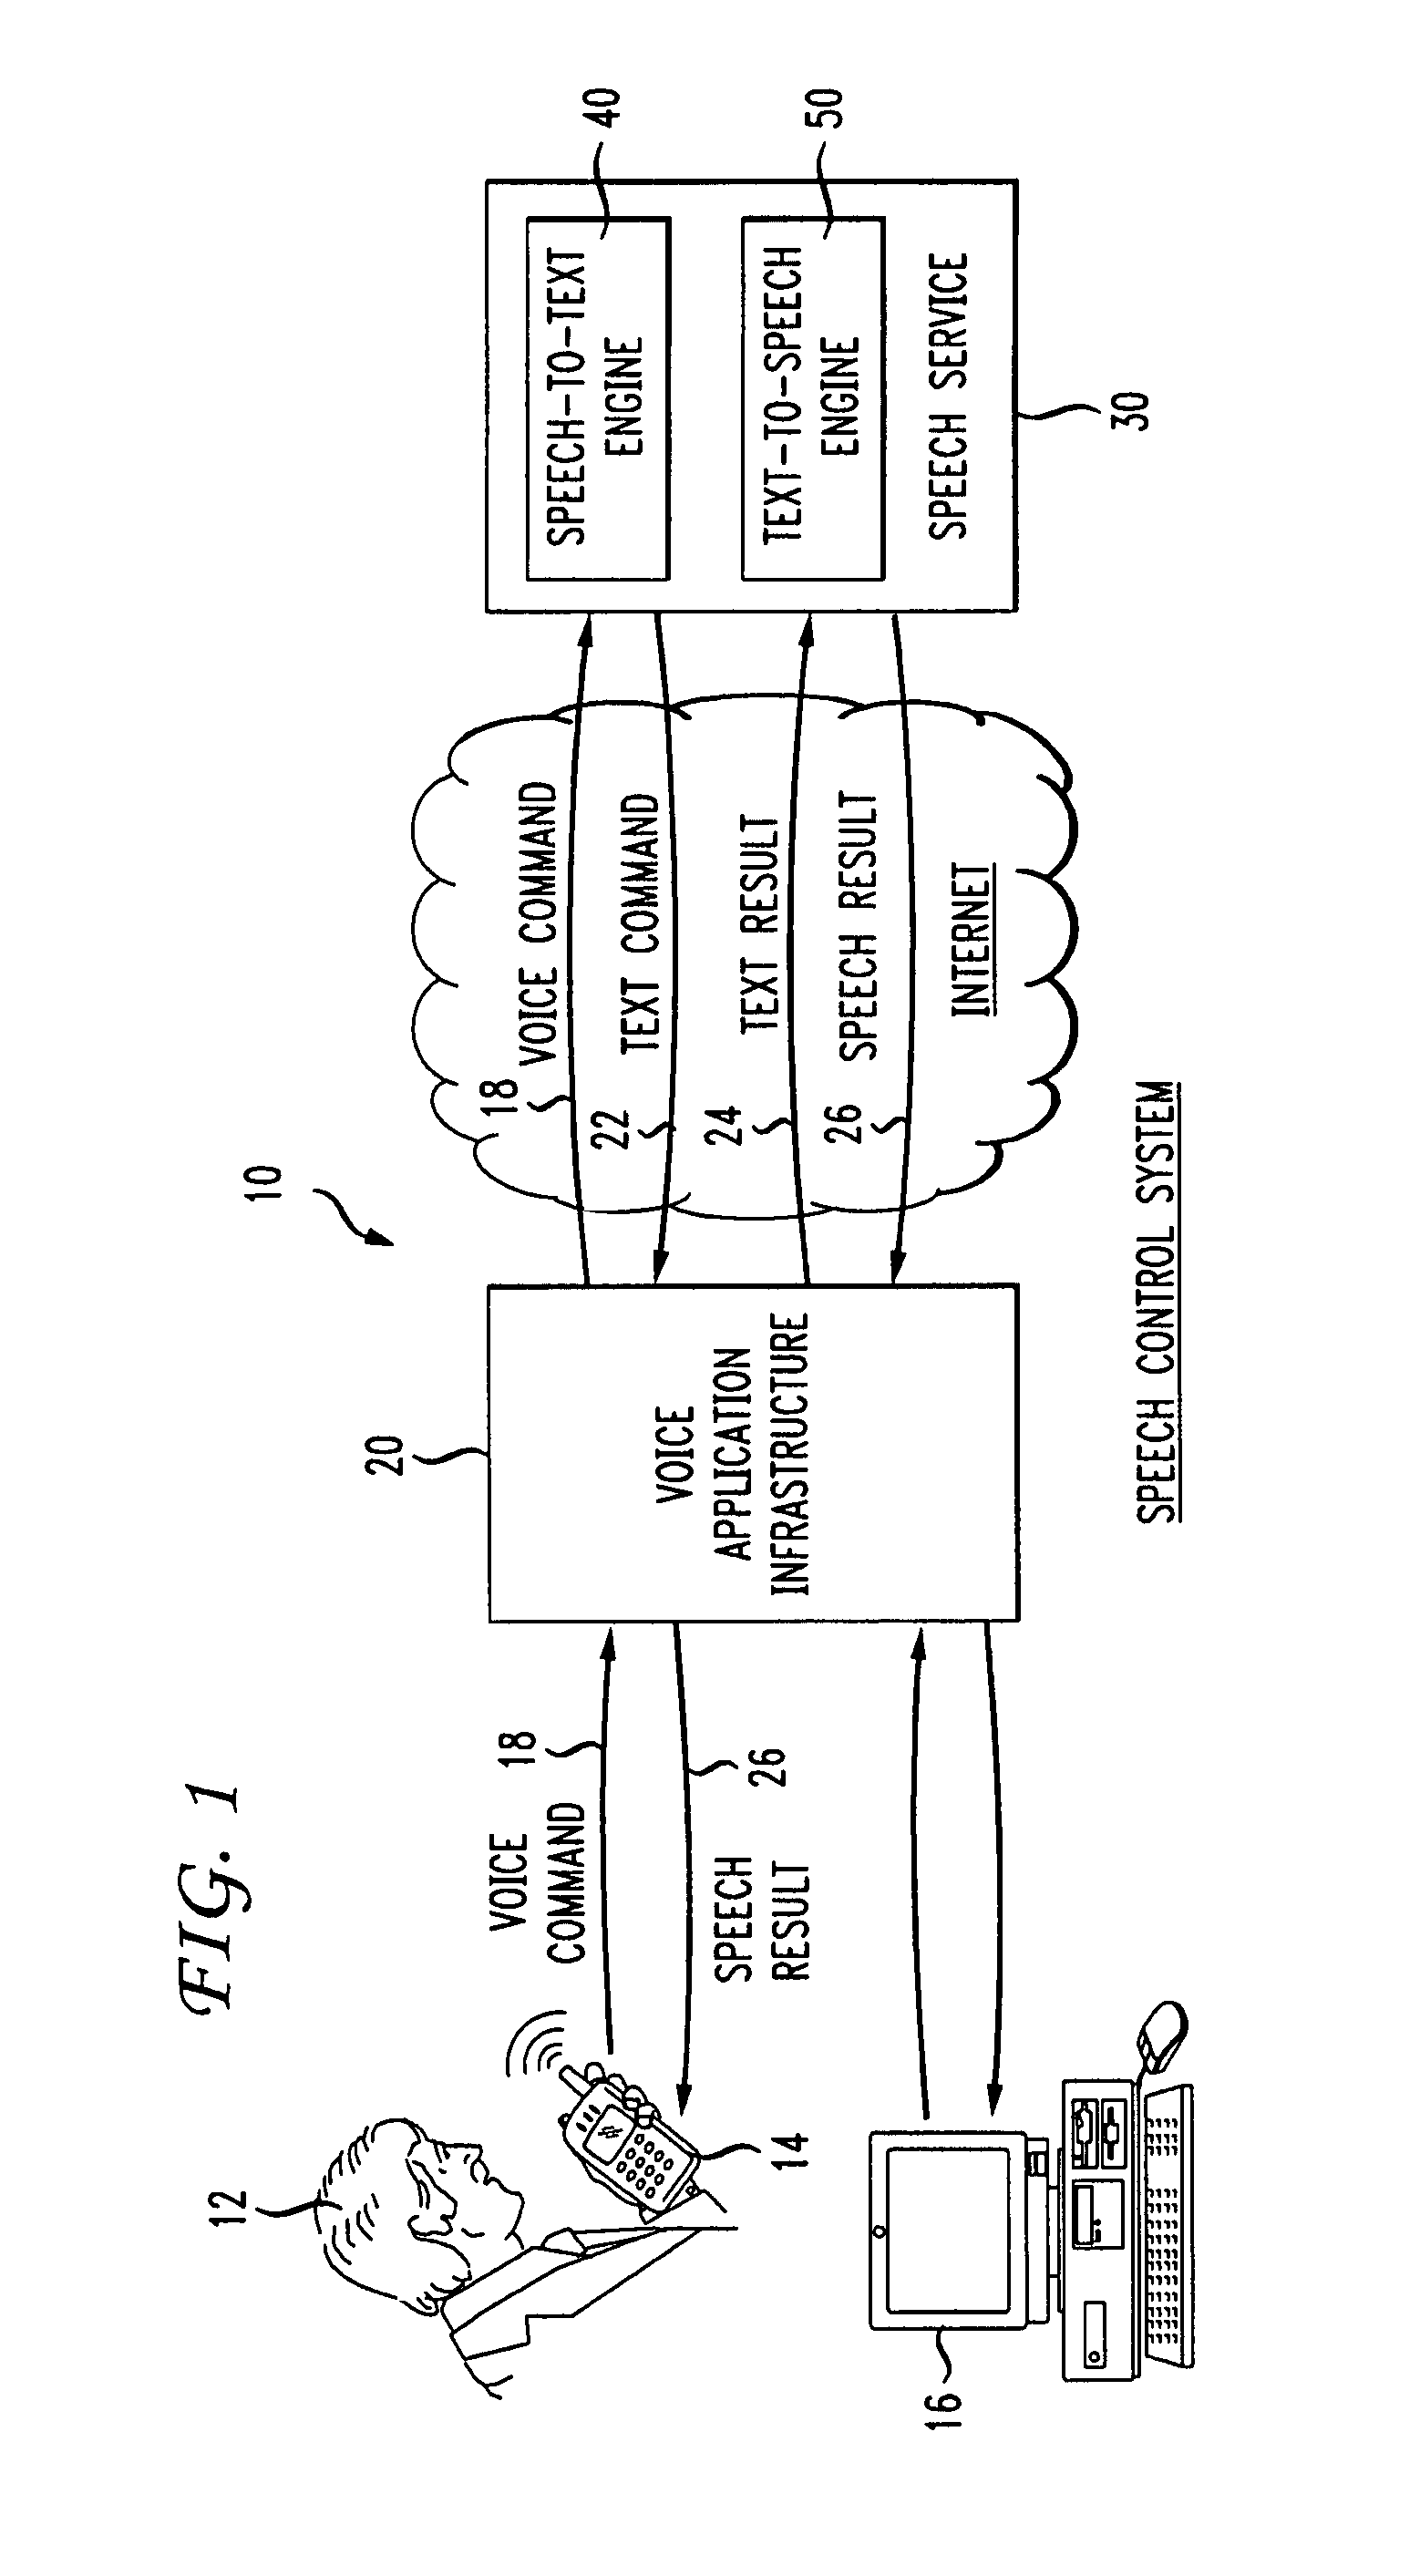 Speech controlled services and devices using internet